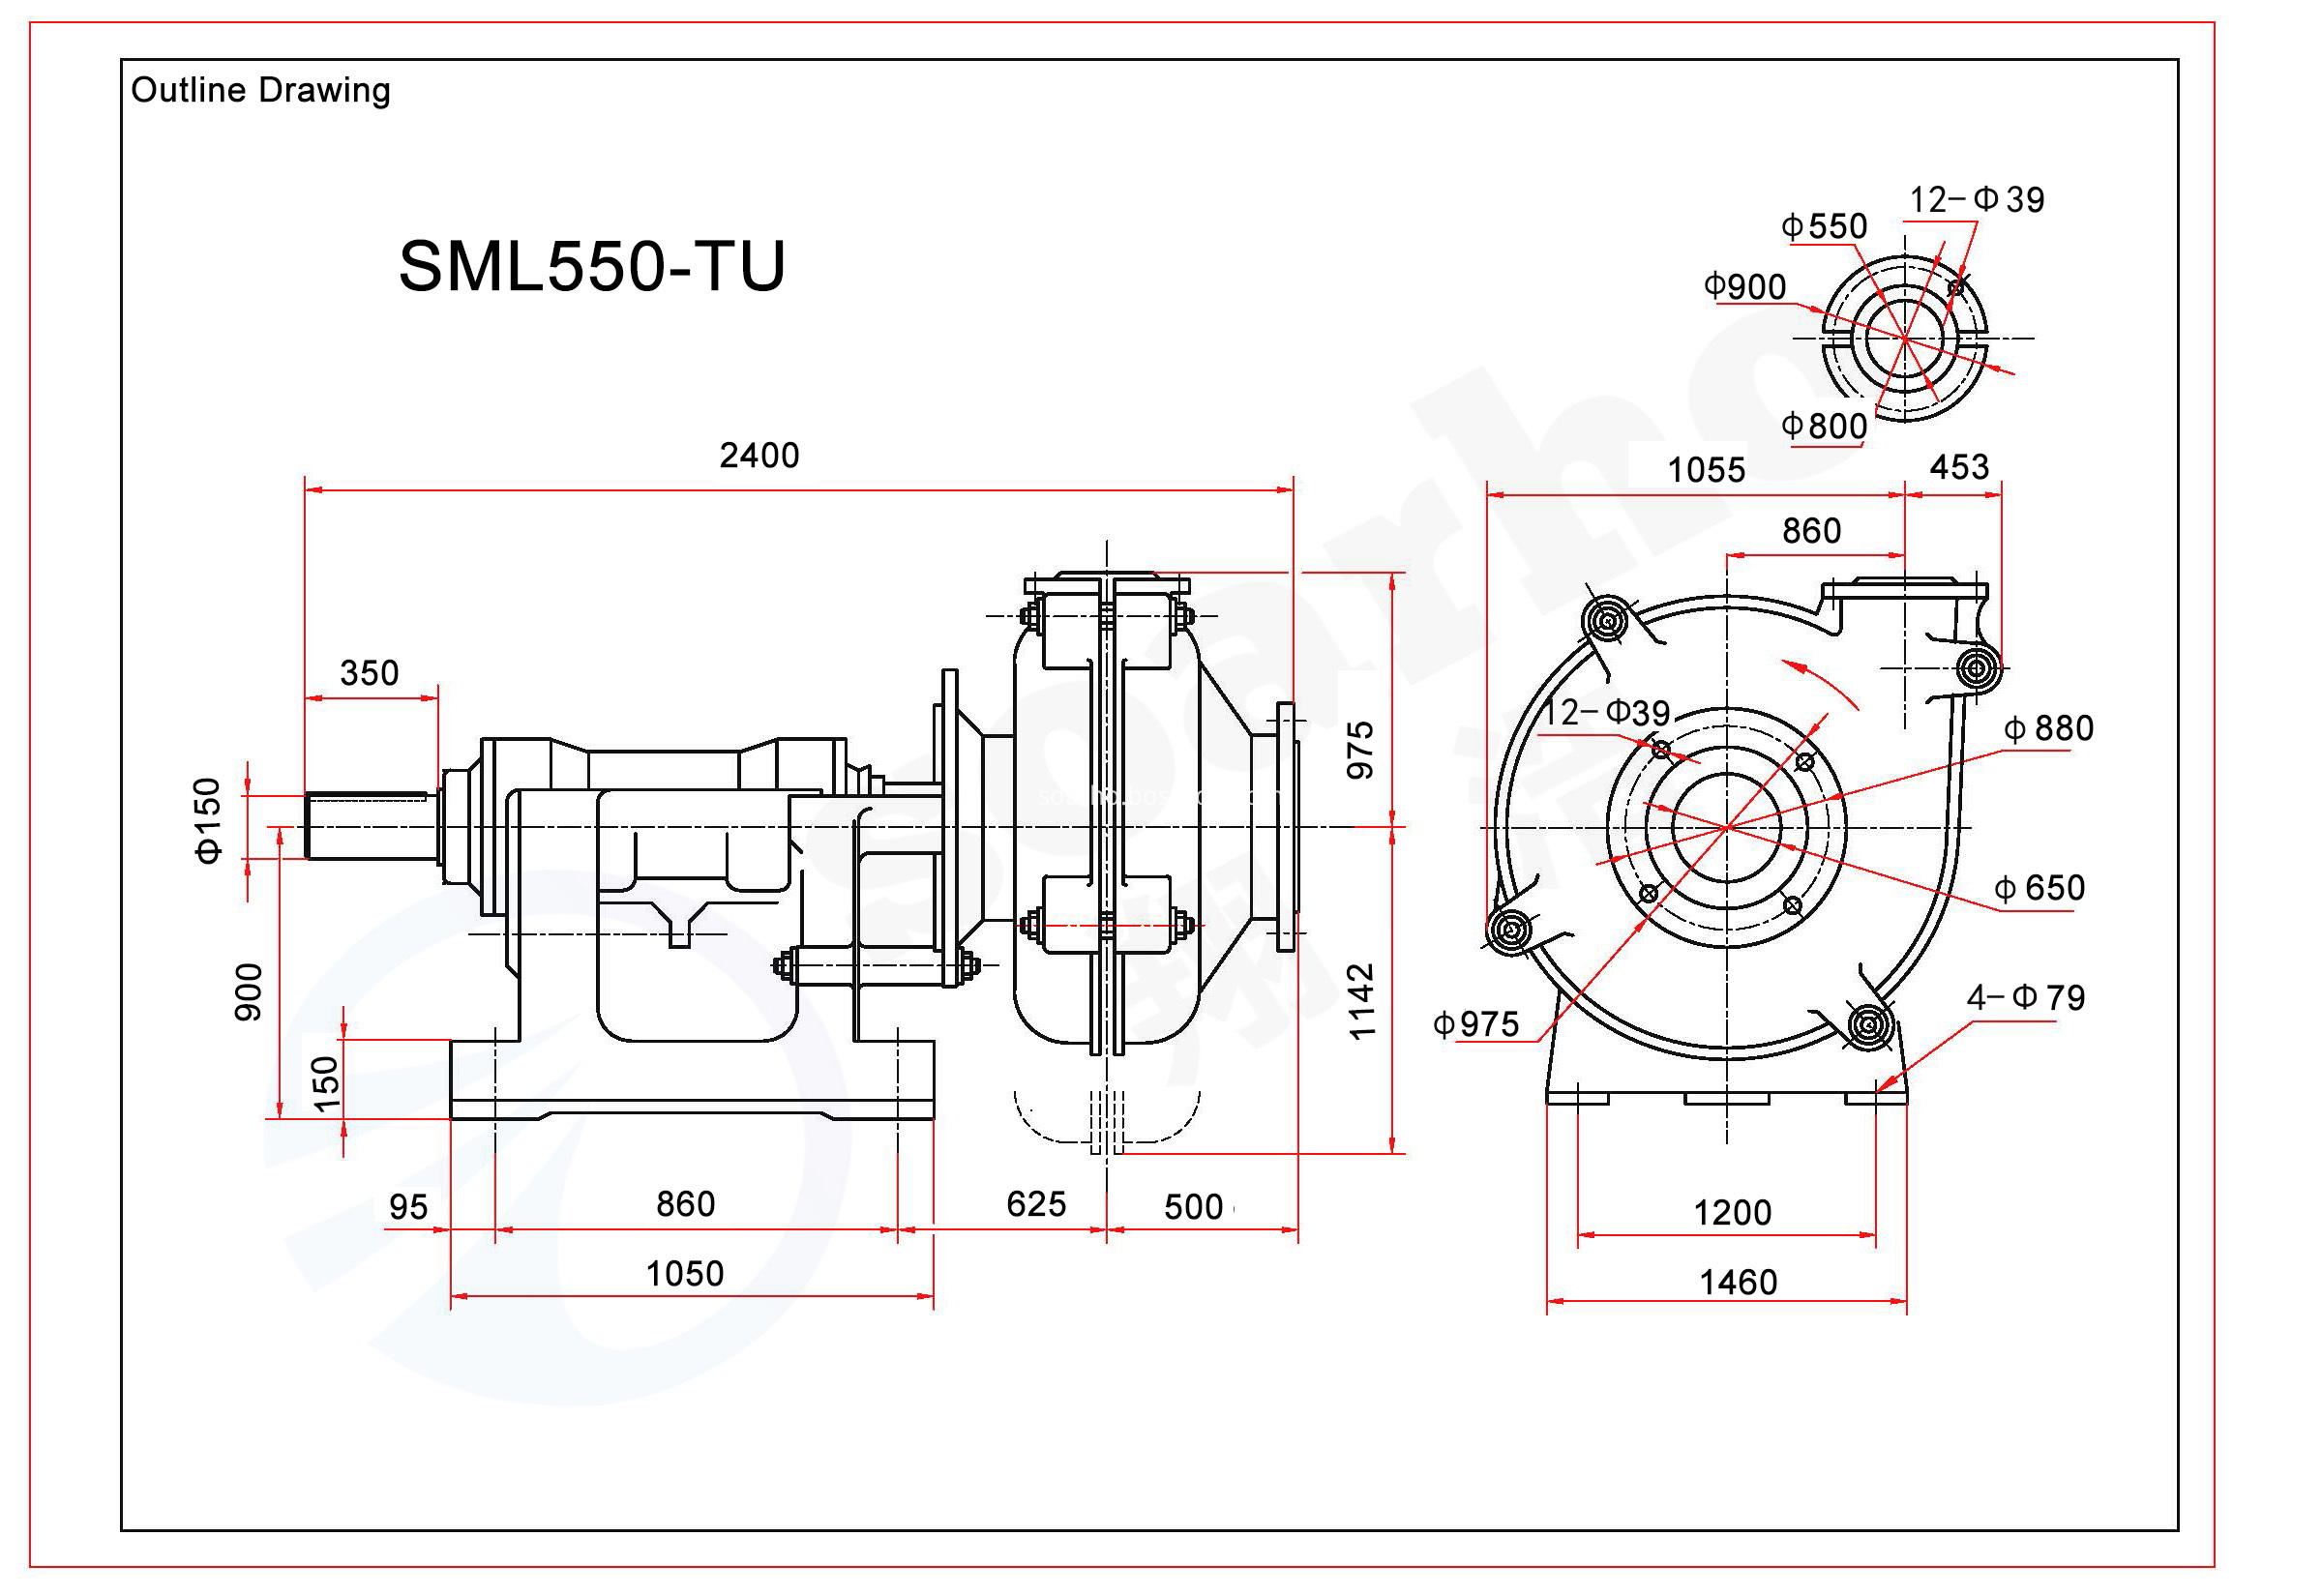 SML550-TU outline drawing